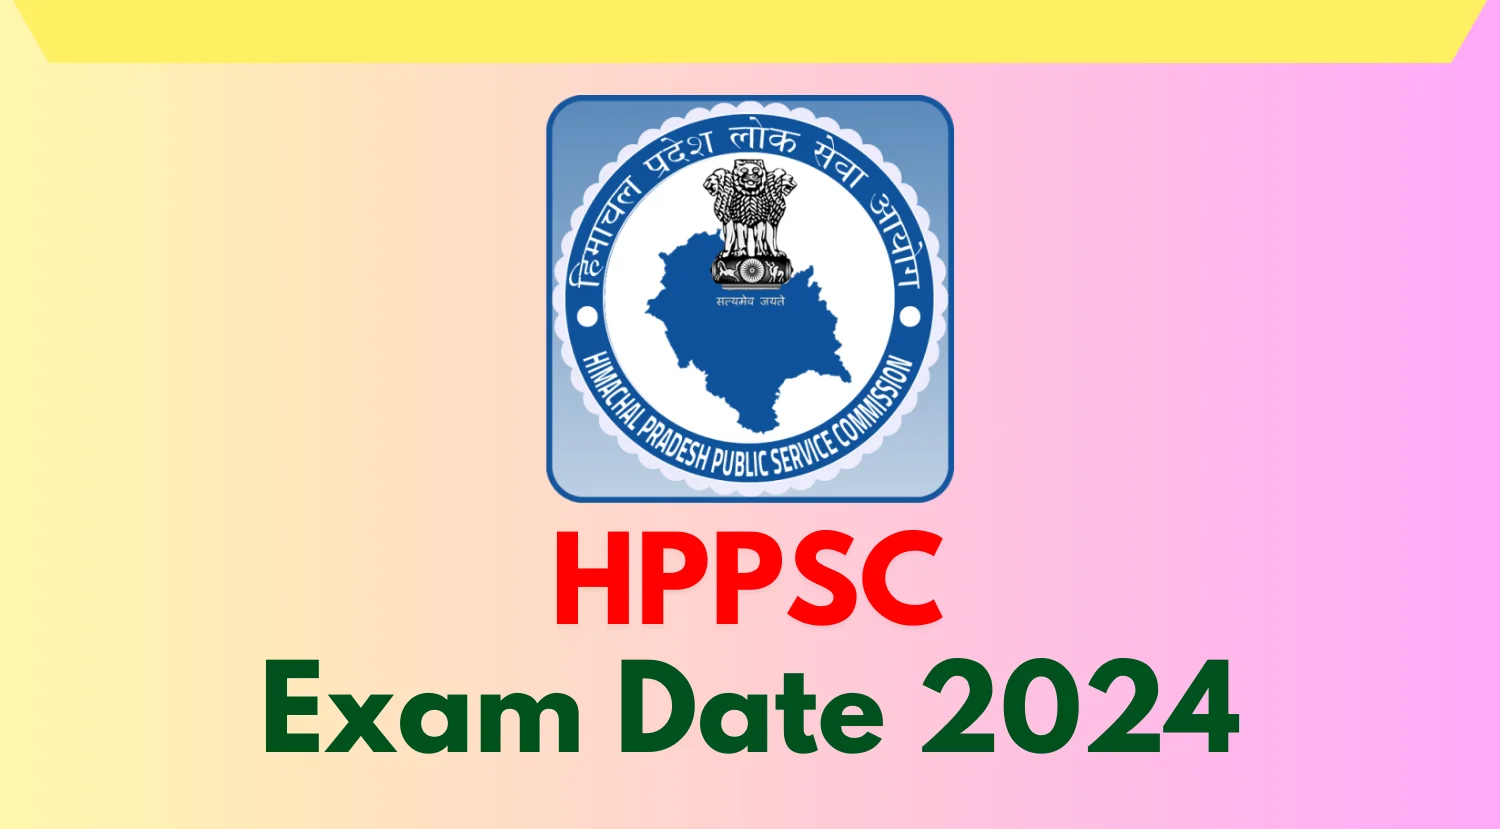 HPPSC Exam Date 2024 for Ro, ARO and Other Posts Released